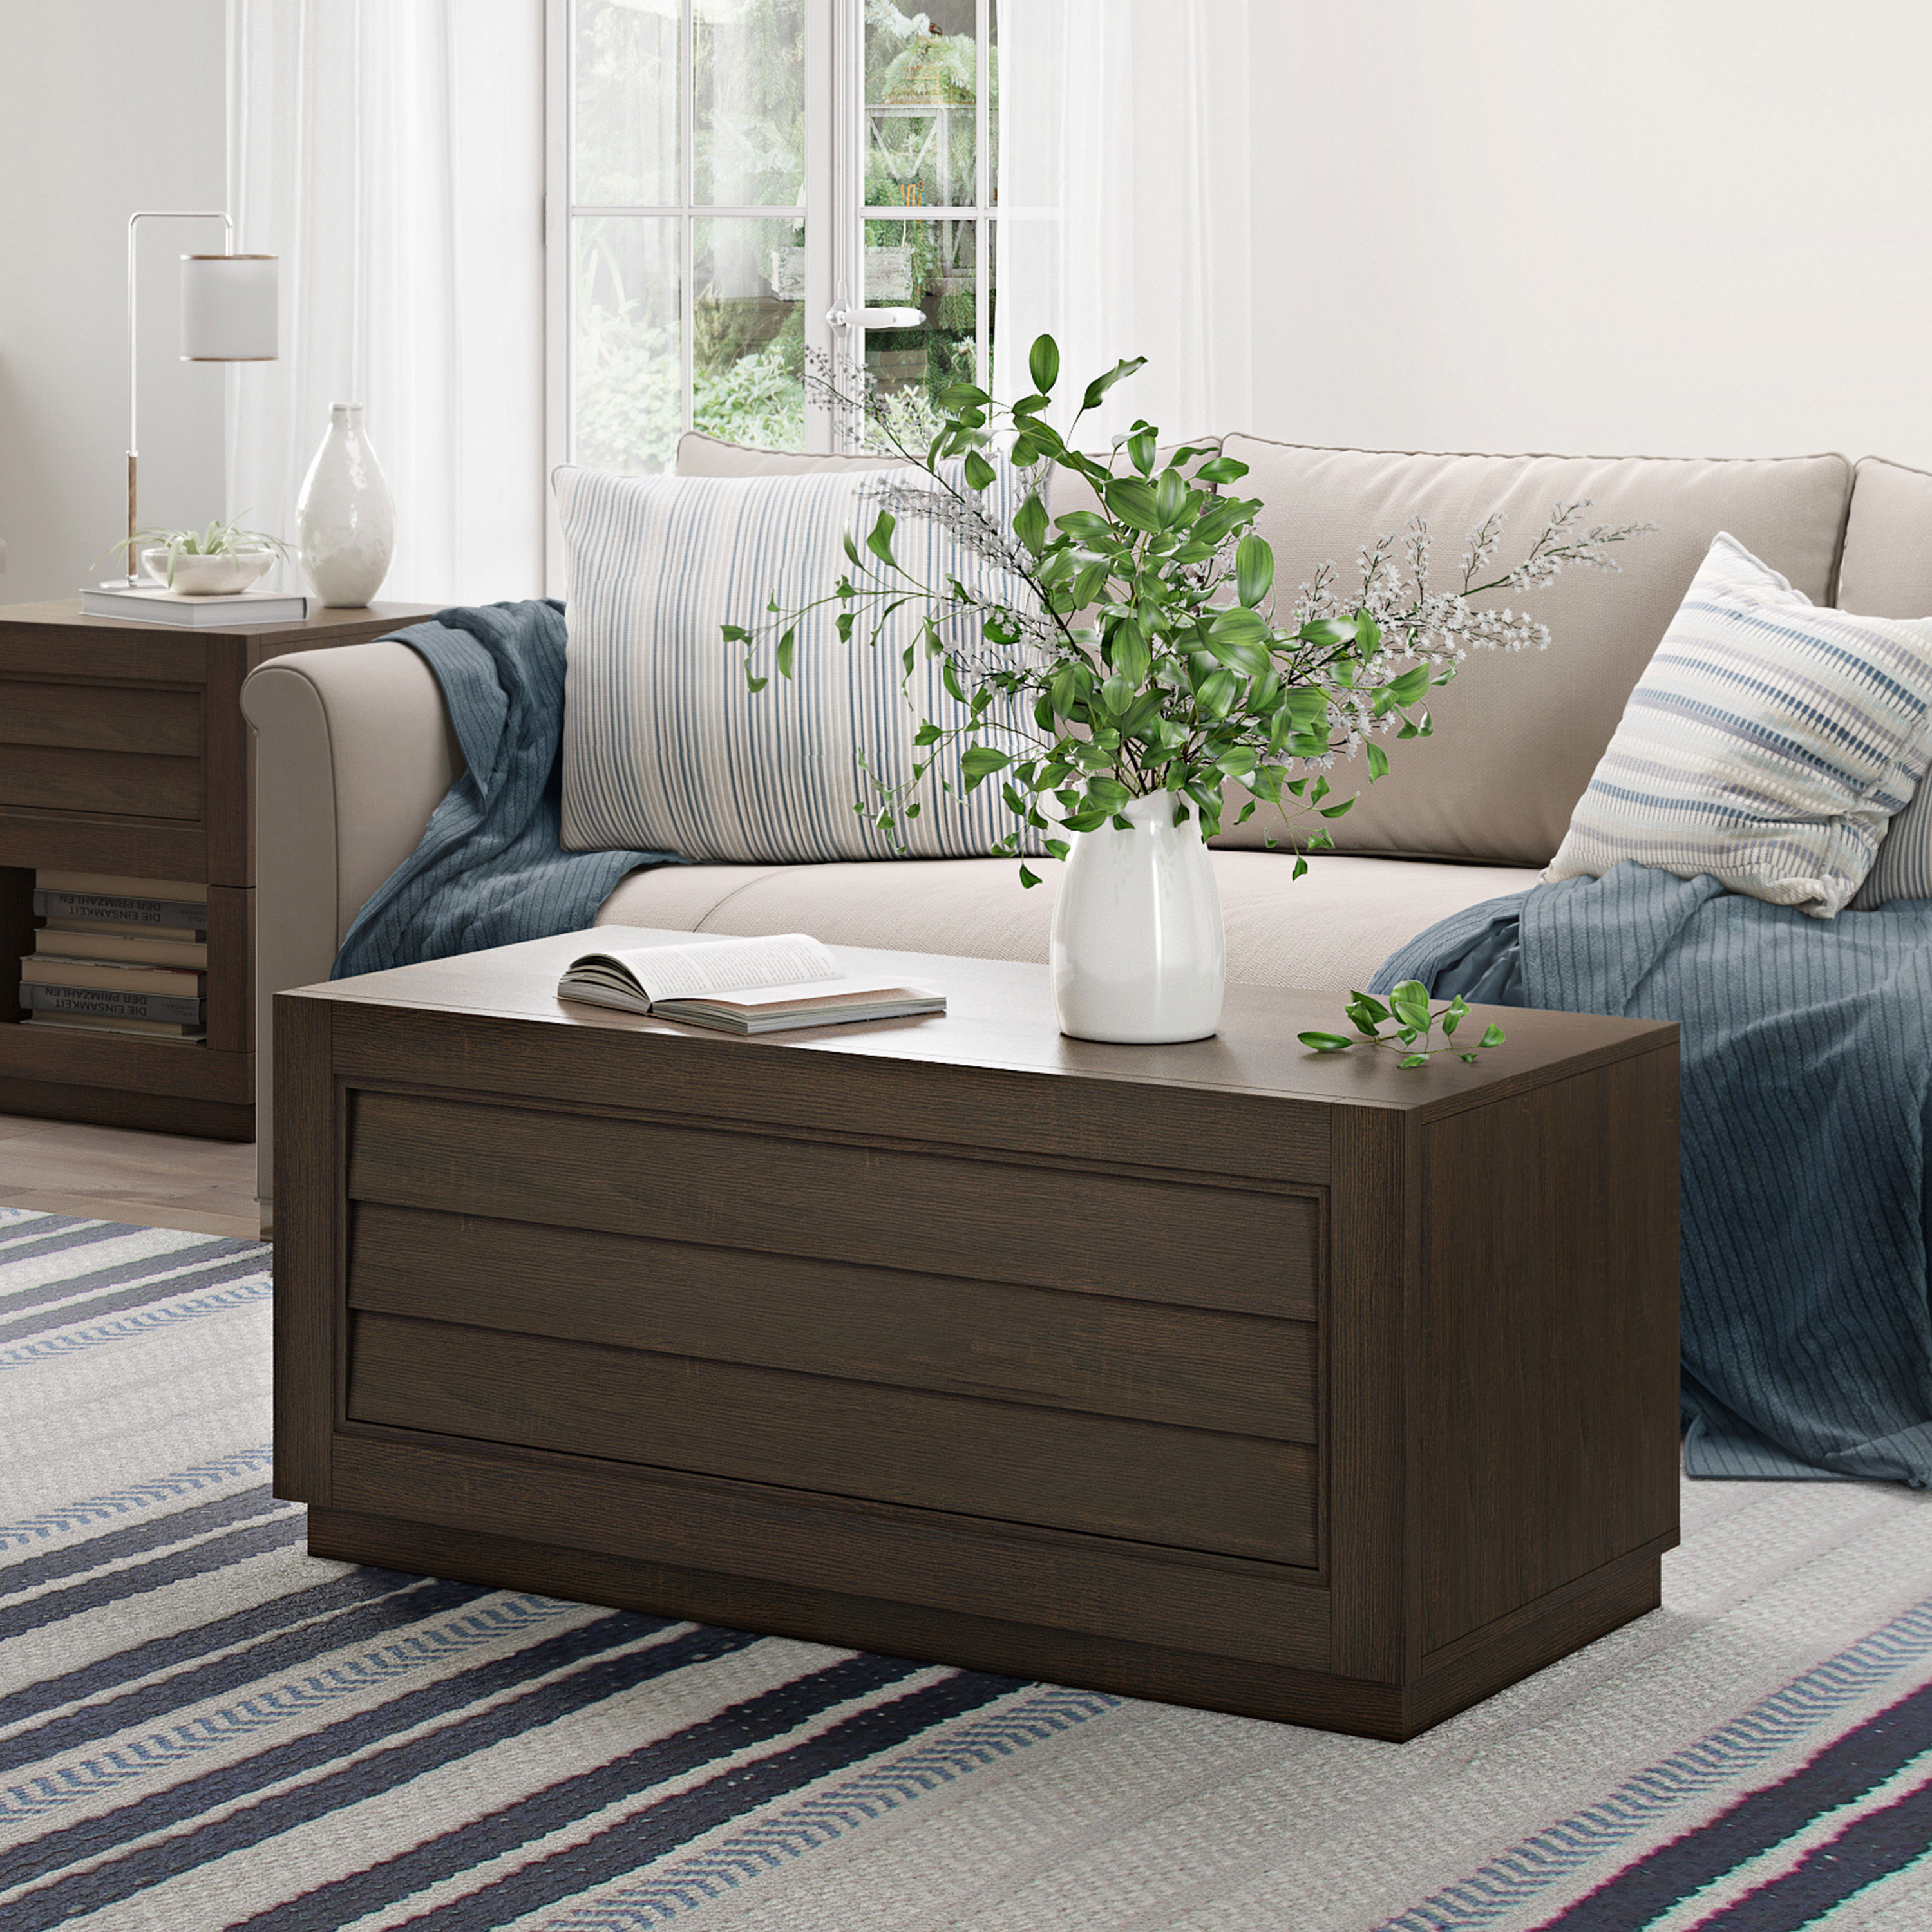 Better Homes & Gardens Coffee Table - image 1 of 9